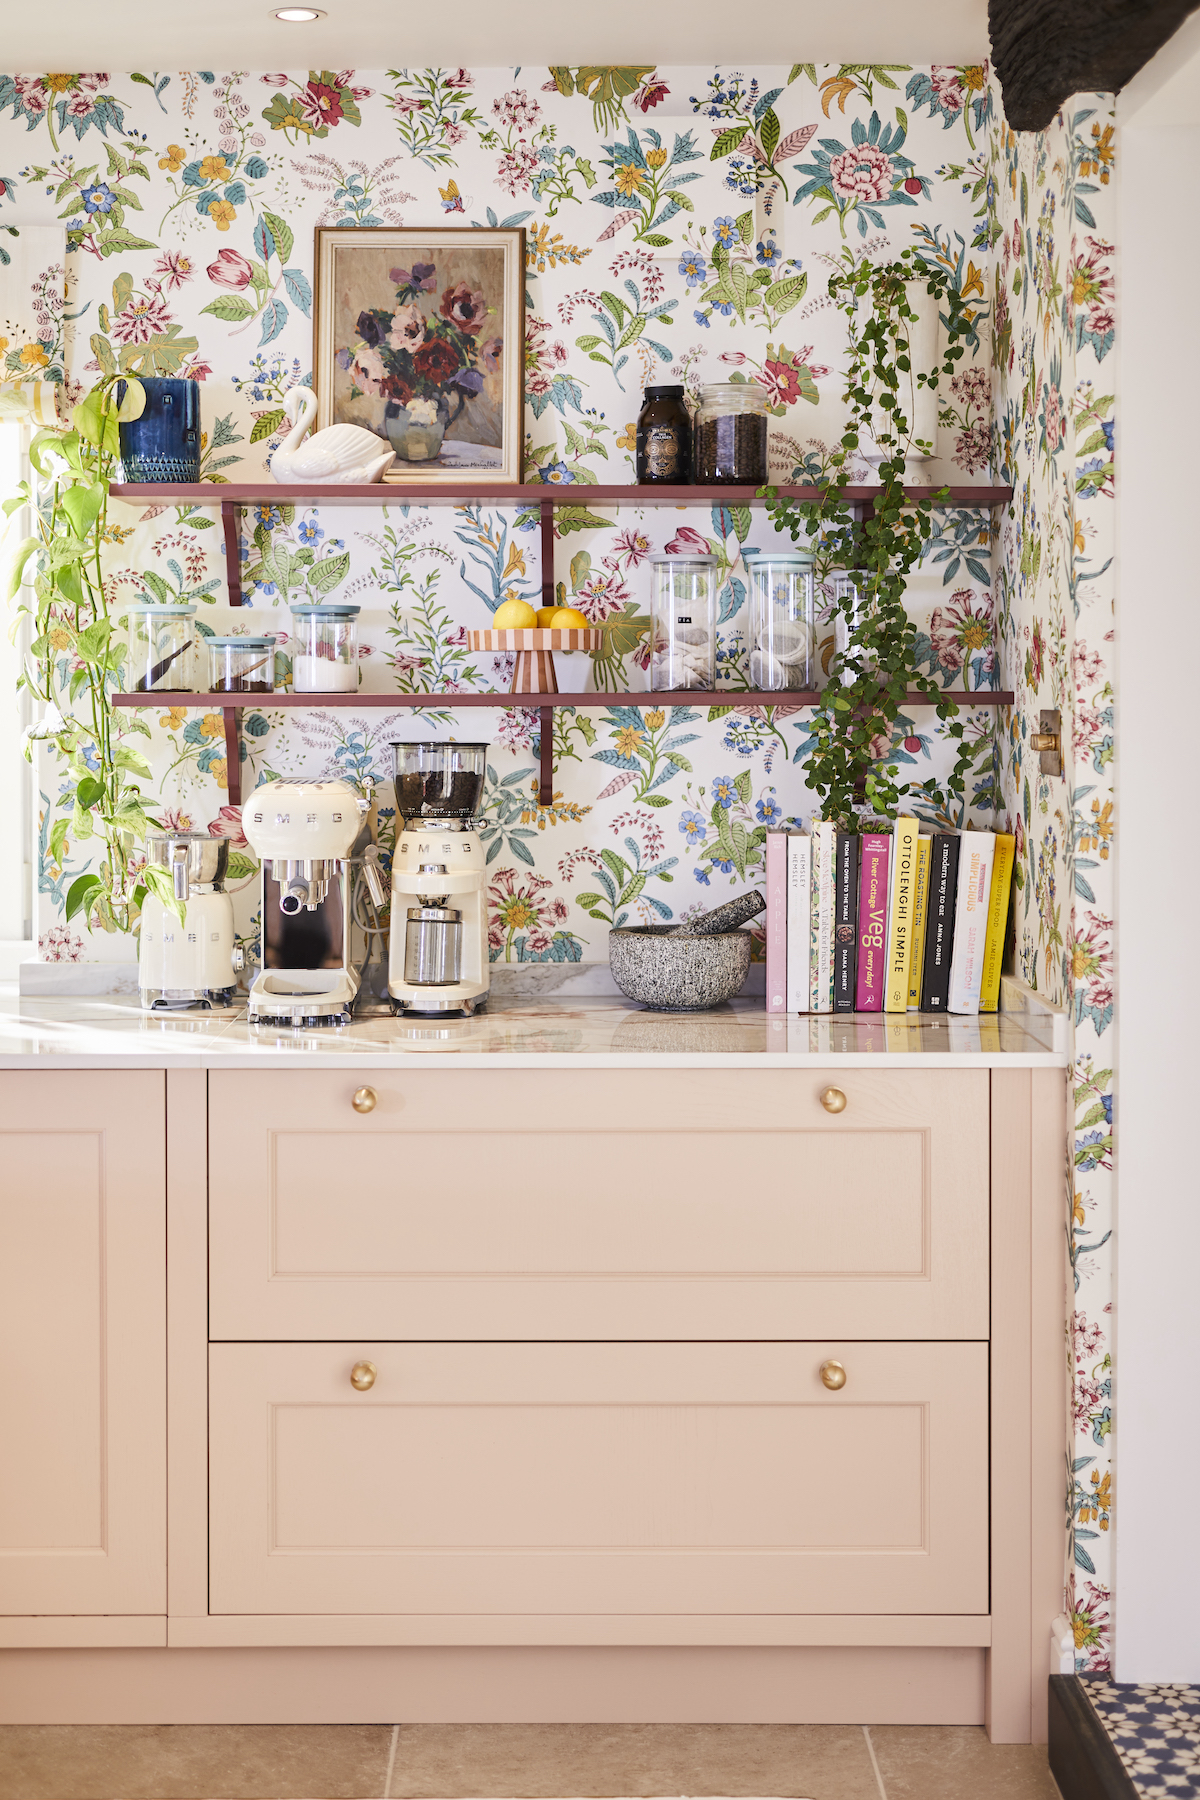 Kitchen cabinet in Chalk Blush Pink with white worktop and open shelving in Burlington Red. Shelves display a range of artwork, plants and glass storage jars with cookbooks and small Smeg appliances underneath.